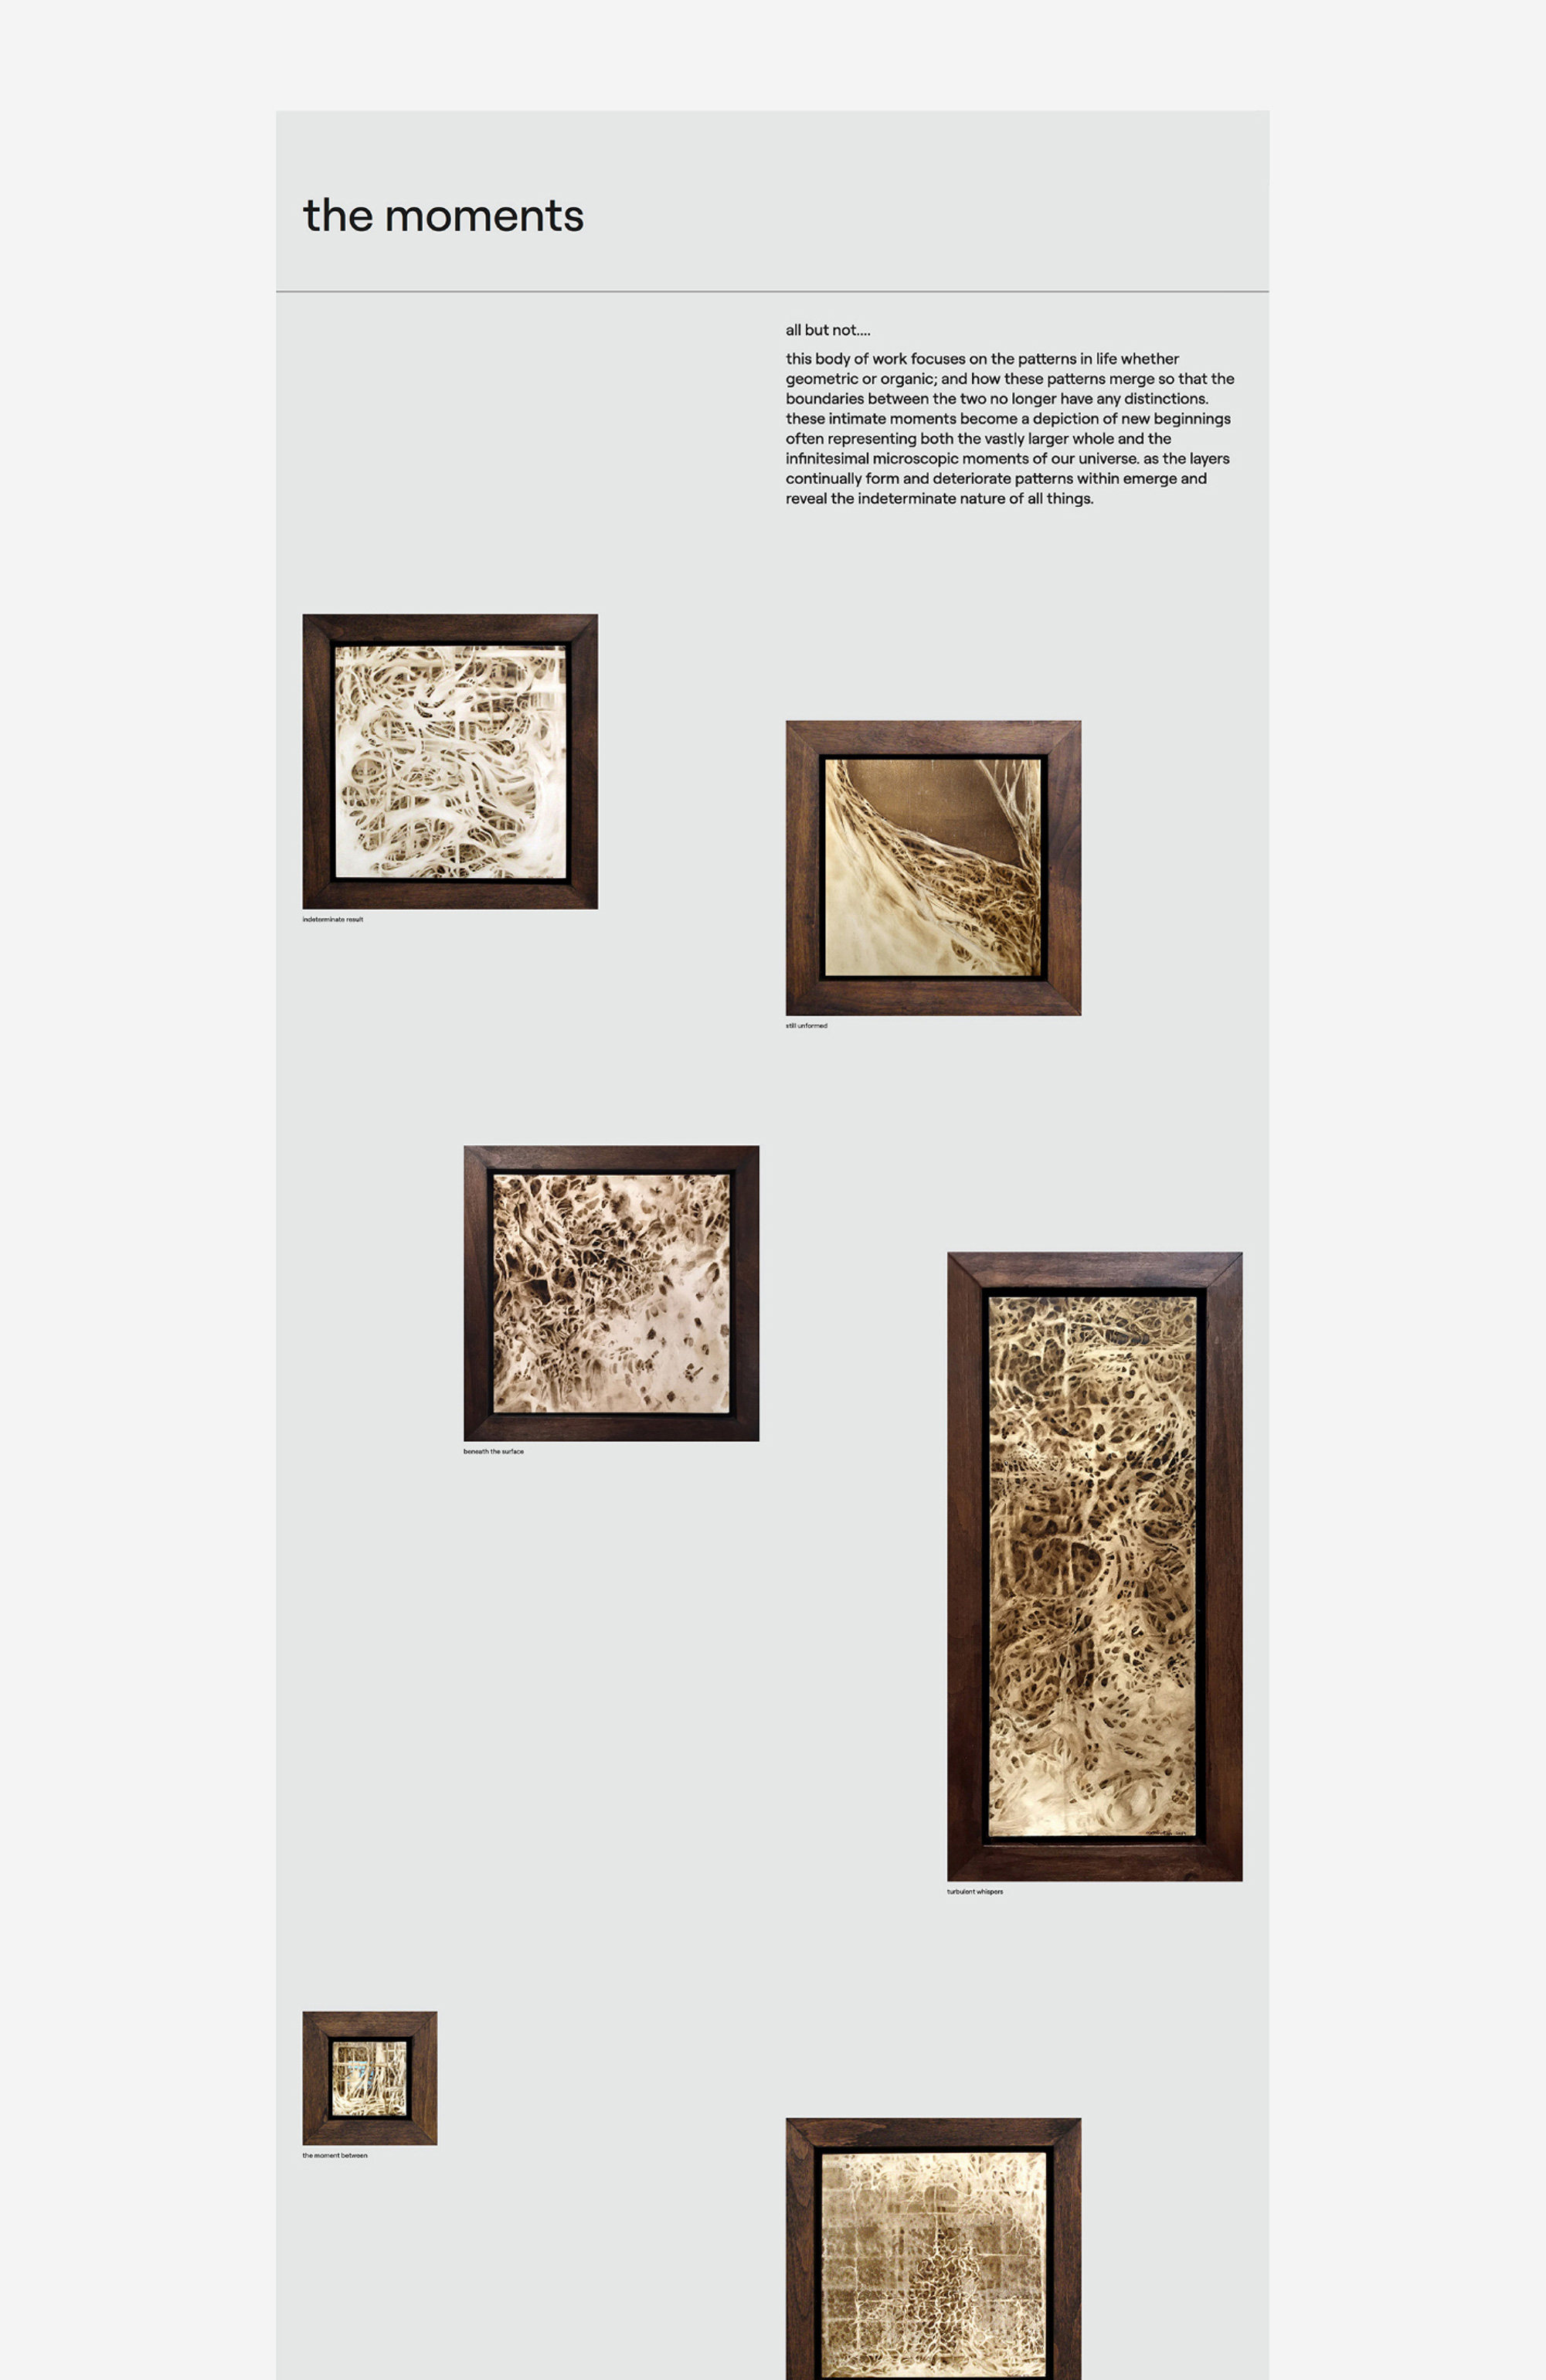 section of a detail page for a series called "the moments", images are various sizes and ratios, depicting porous surfaces in a brown, monochromatic color scheme